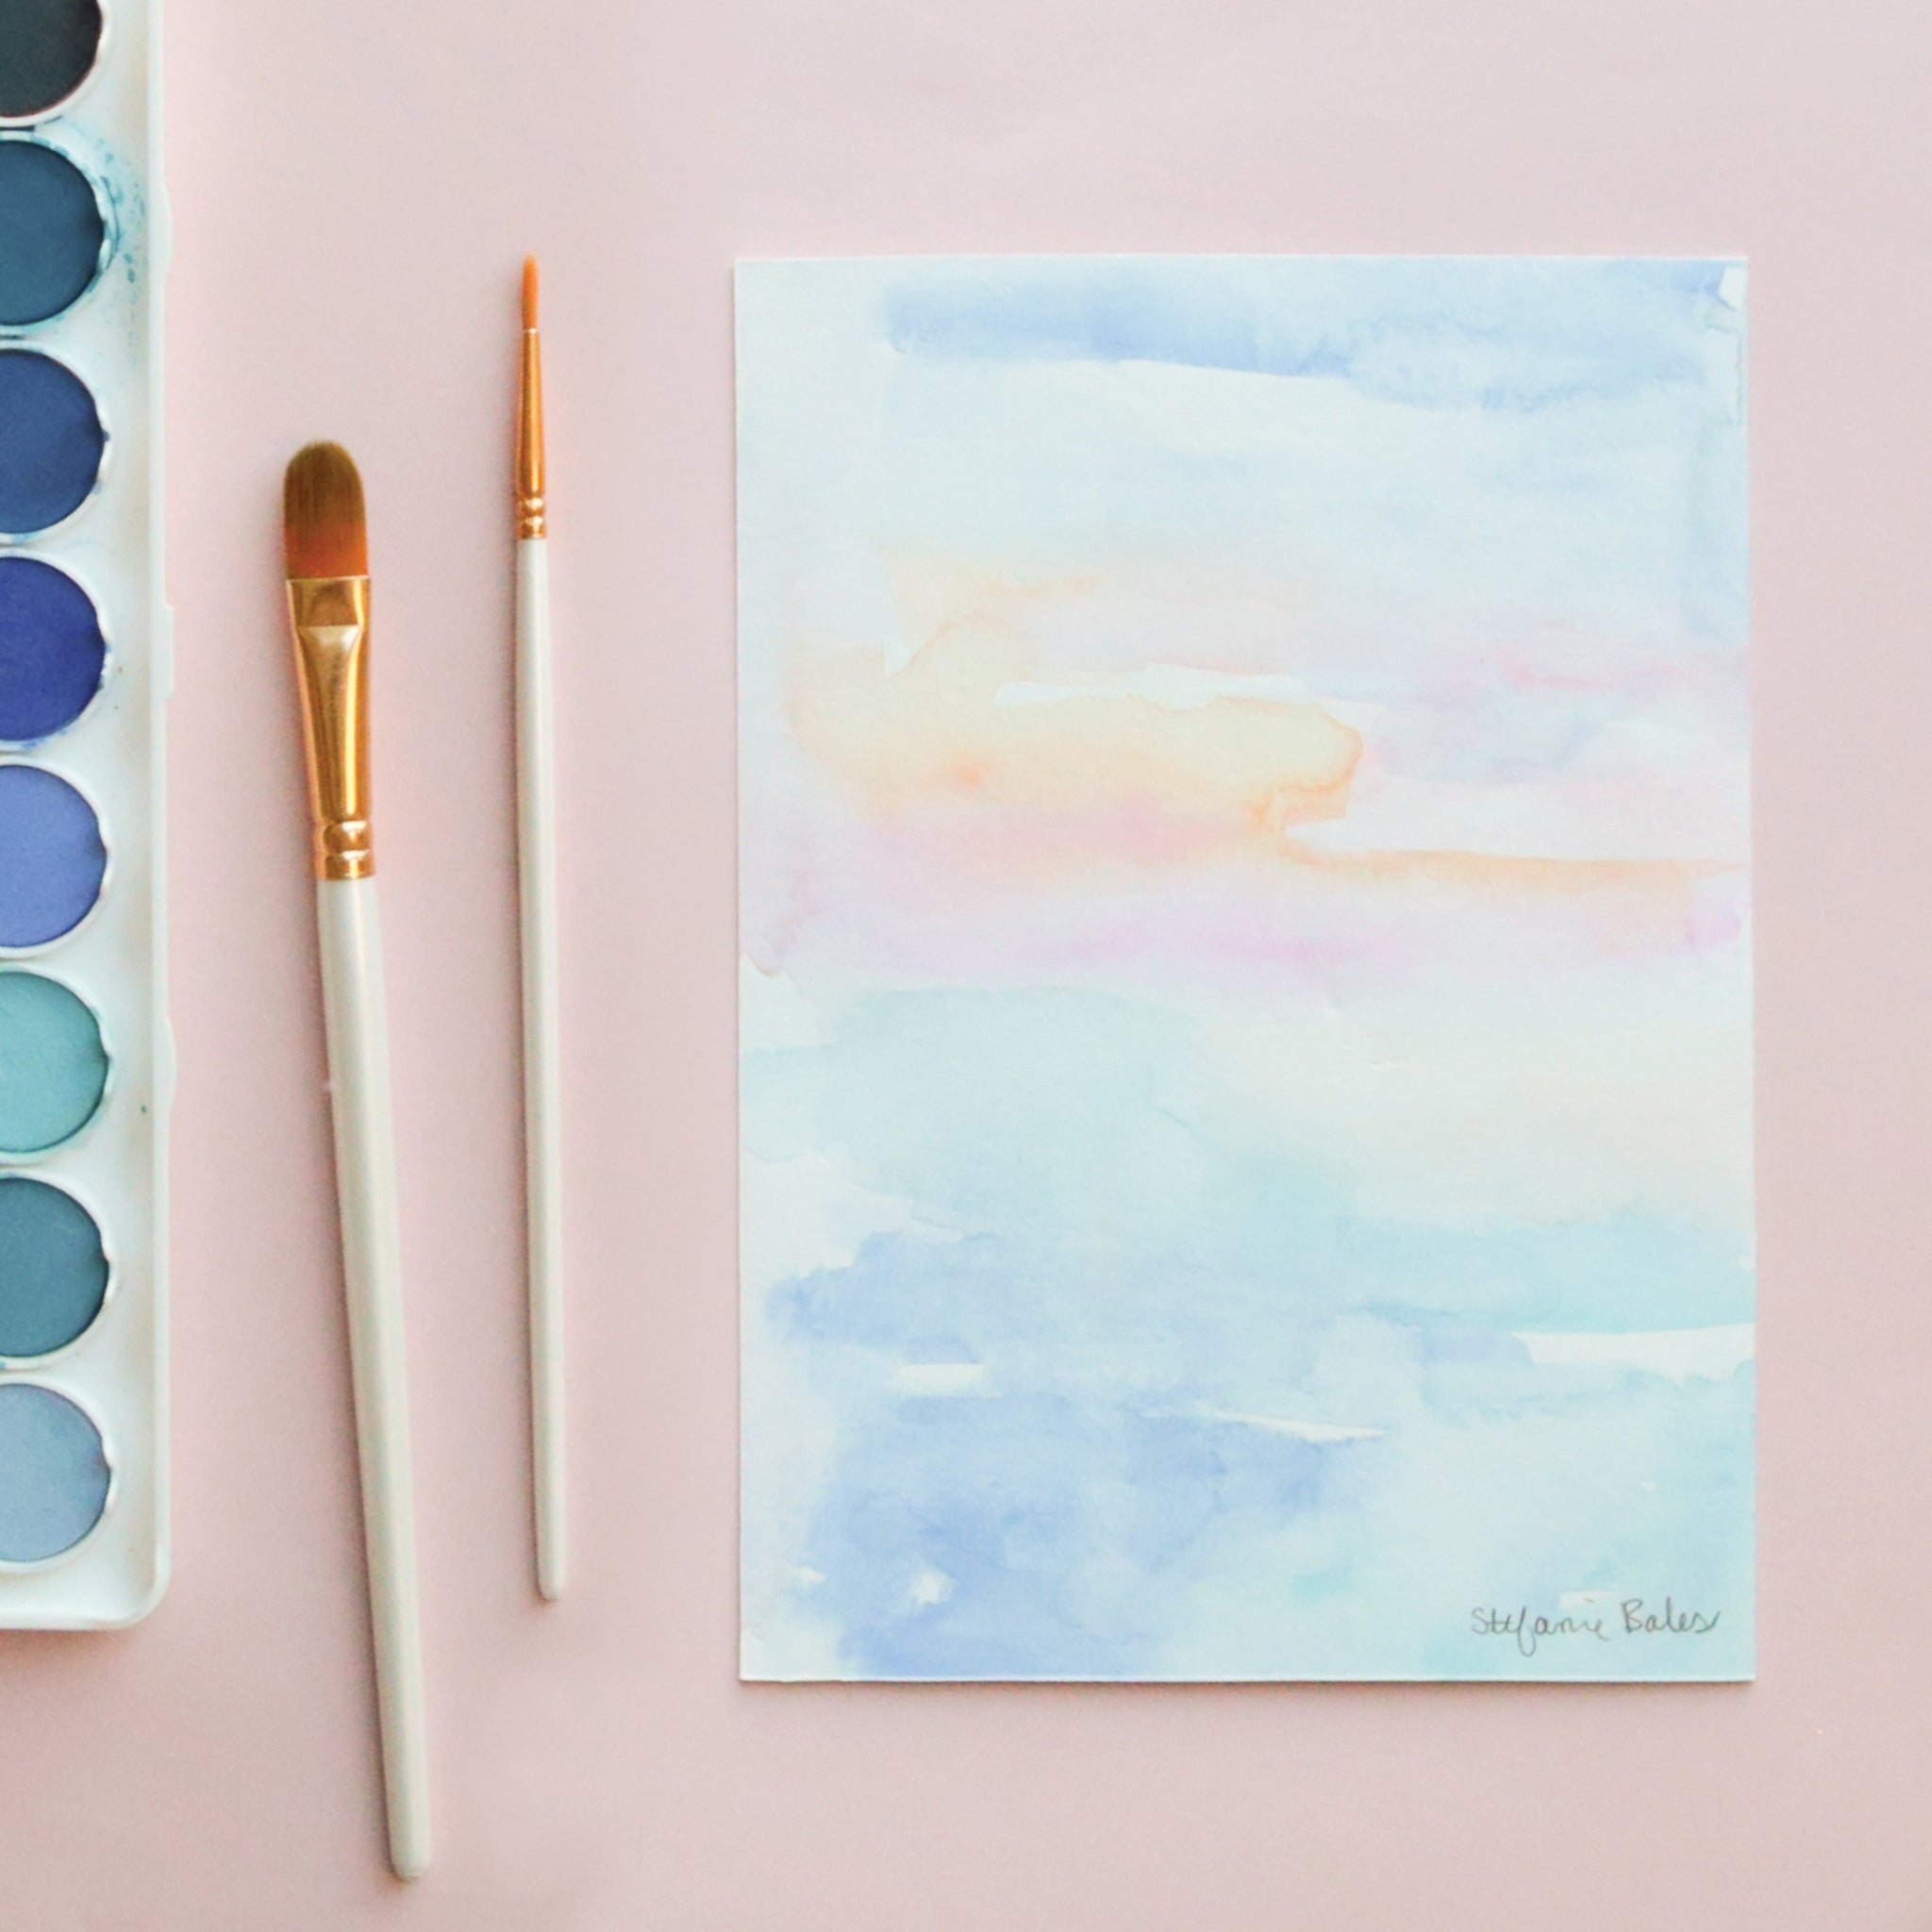 On a light pink background is a photo of blue toned watercolors and paintbrush alongside a piece of art next to it.